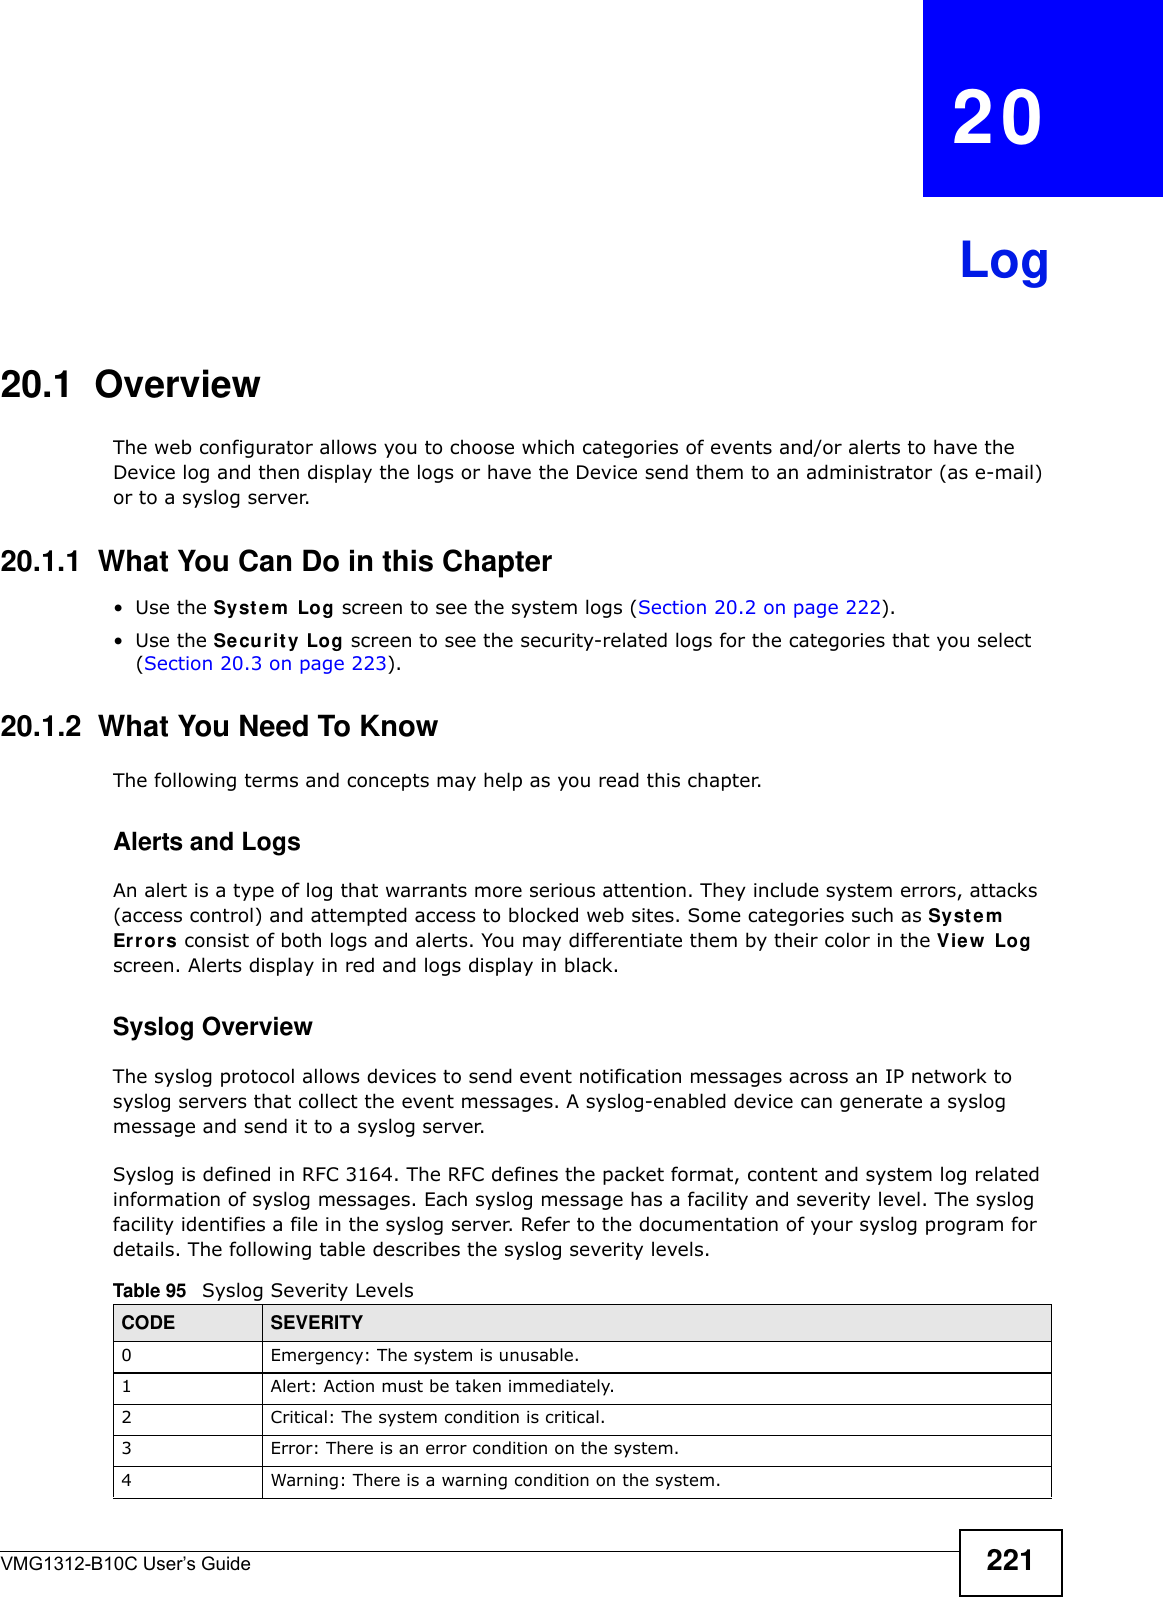 VMG1312-B10C User’s Guide 221CHAPTER   20Log20.1  OverviewThe web configurator allows you to choose which categories of events and/or alerts to have the Device log and then display the logs or have the Device send them to an administrator (as e-mail) or to a syslog server. 20.1.1  What You Can Do in this Chapter•Use the Syste m  Log screen to see the system logs (Section 20.2 on page 222).•Use the Securit y Log screen to see the security-related logs for the categories that you select (Section 20.3 on page 223).20.1.2  What You Need To KnowThe following terms and concepts may help as you read this chapter.Alerts and LogsAn alert is a type of log that warrants more serious attention. They include system errors, attacks (access control) and attempted access to blocked web sites. Some categories such as Syst em  Er r ors consist of both logs and alerts. You may differentiate them by their color in the Vie w  Log screen. Alerts display in red and logs display in black.Syslog Overview The syslog protocol allows devices to send event notification messages across an IP network to syslog servers that collect the event messages. A syslog-enabled device can generate a syslog message and send it to a syslog server.Syslog is defined in RFC 3164. The RFC defines the packet format, content and system log related information of syslog messages. Each syslog message has a facility and severity level. The syslog facility identifies a file in the syslog server. Refer to the documentation of your syslog program for details. The following table describes the syslog severity levels. Table 95   Syslog Severity LevelsCODE SEVERITY0 Emergency: The system is unusable.1 Alert: Action must be taken immediately.2 Critical: The system condition is critical.3 Error: There is an error condition on the system.4 Warning: There is a warning condition on the system.